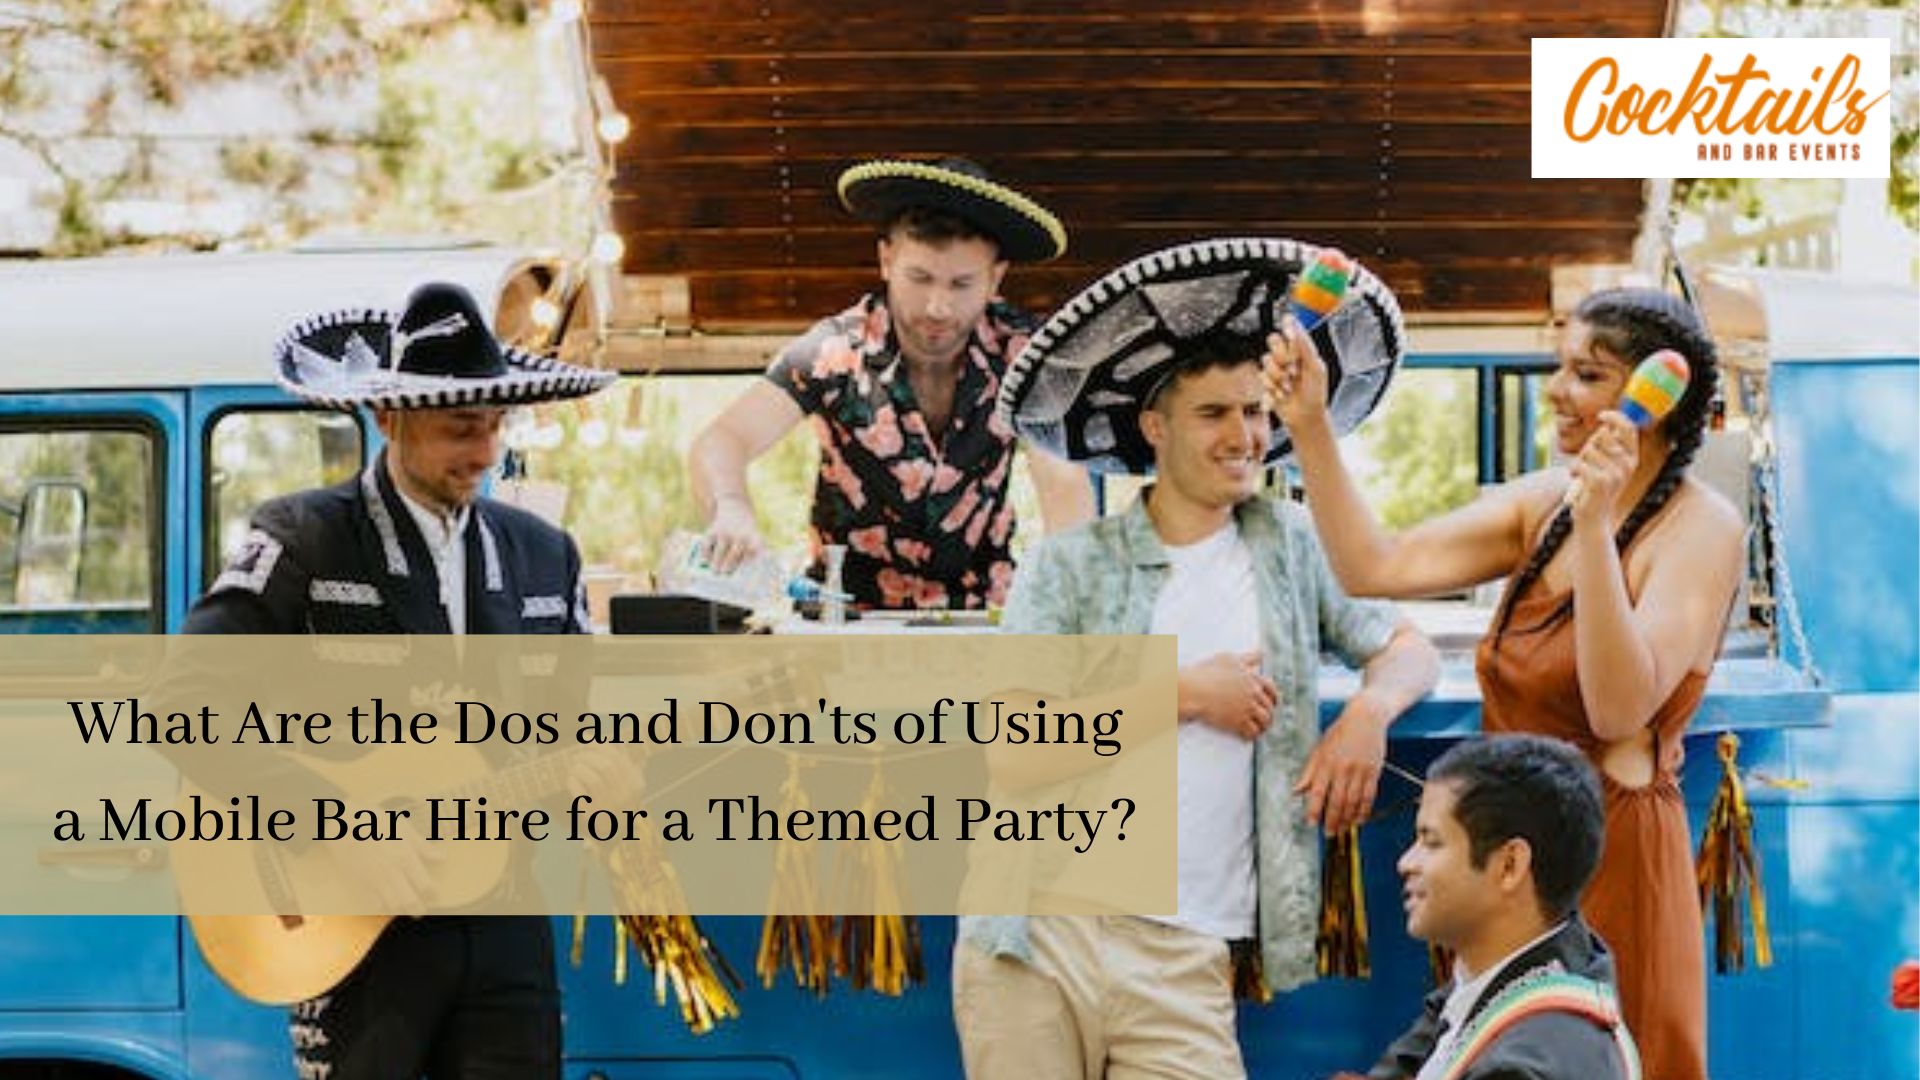 What Are the Dos and Don'ts of Using a Mobile Bar Hire for a Themed Party? -